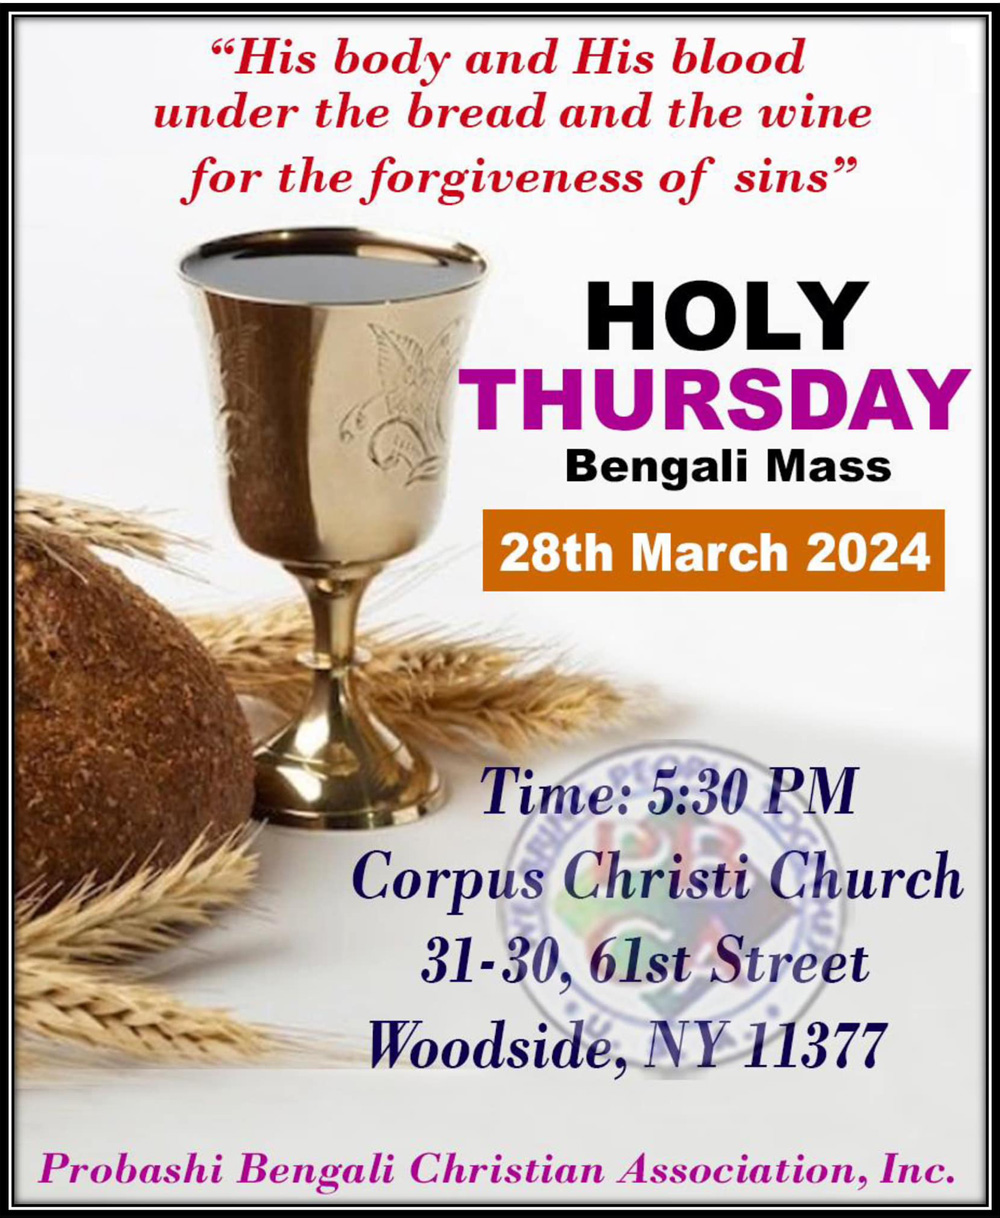 http://www.pbcausa.org/App_Themes/PBCA/Images/Events/Occasional/2024/Probashi Holy Thursday.jpg